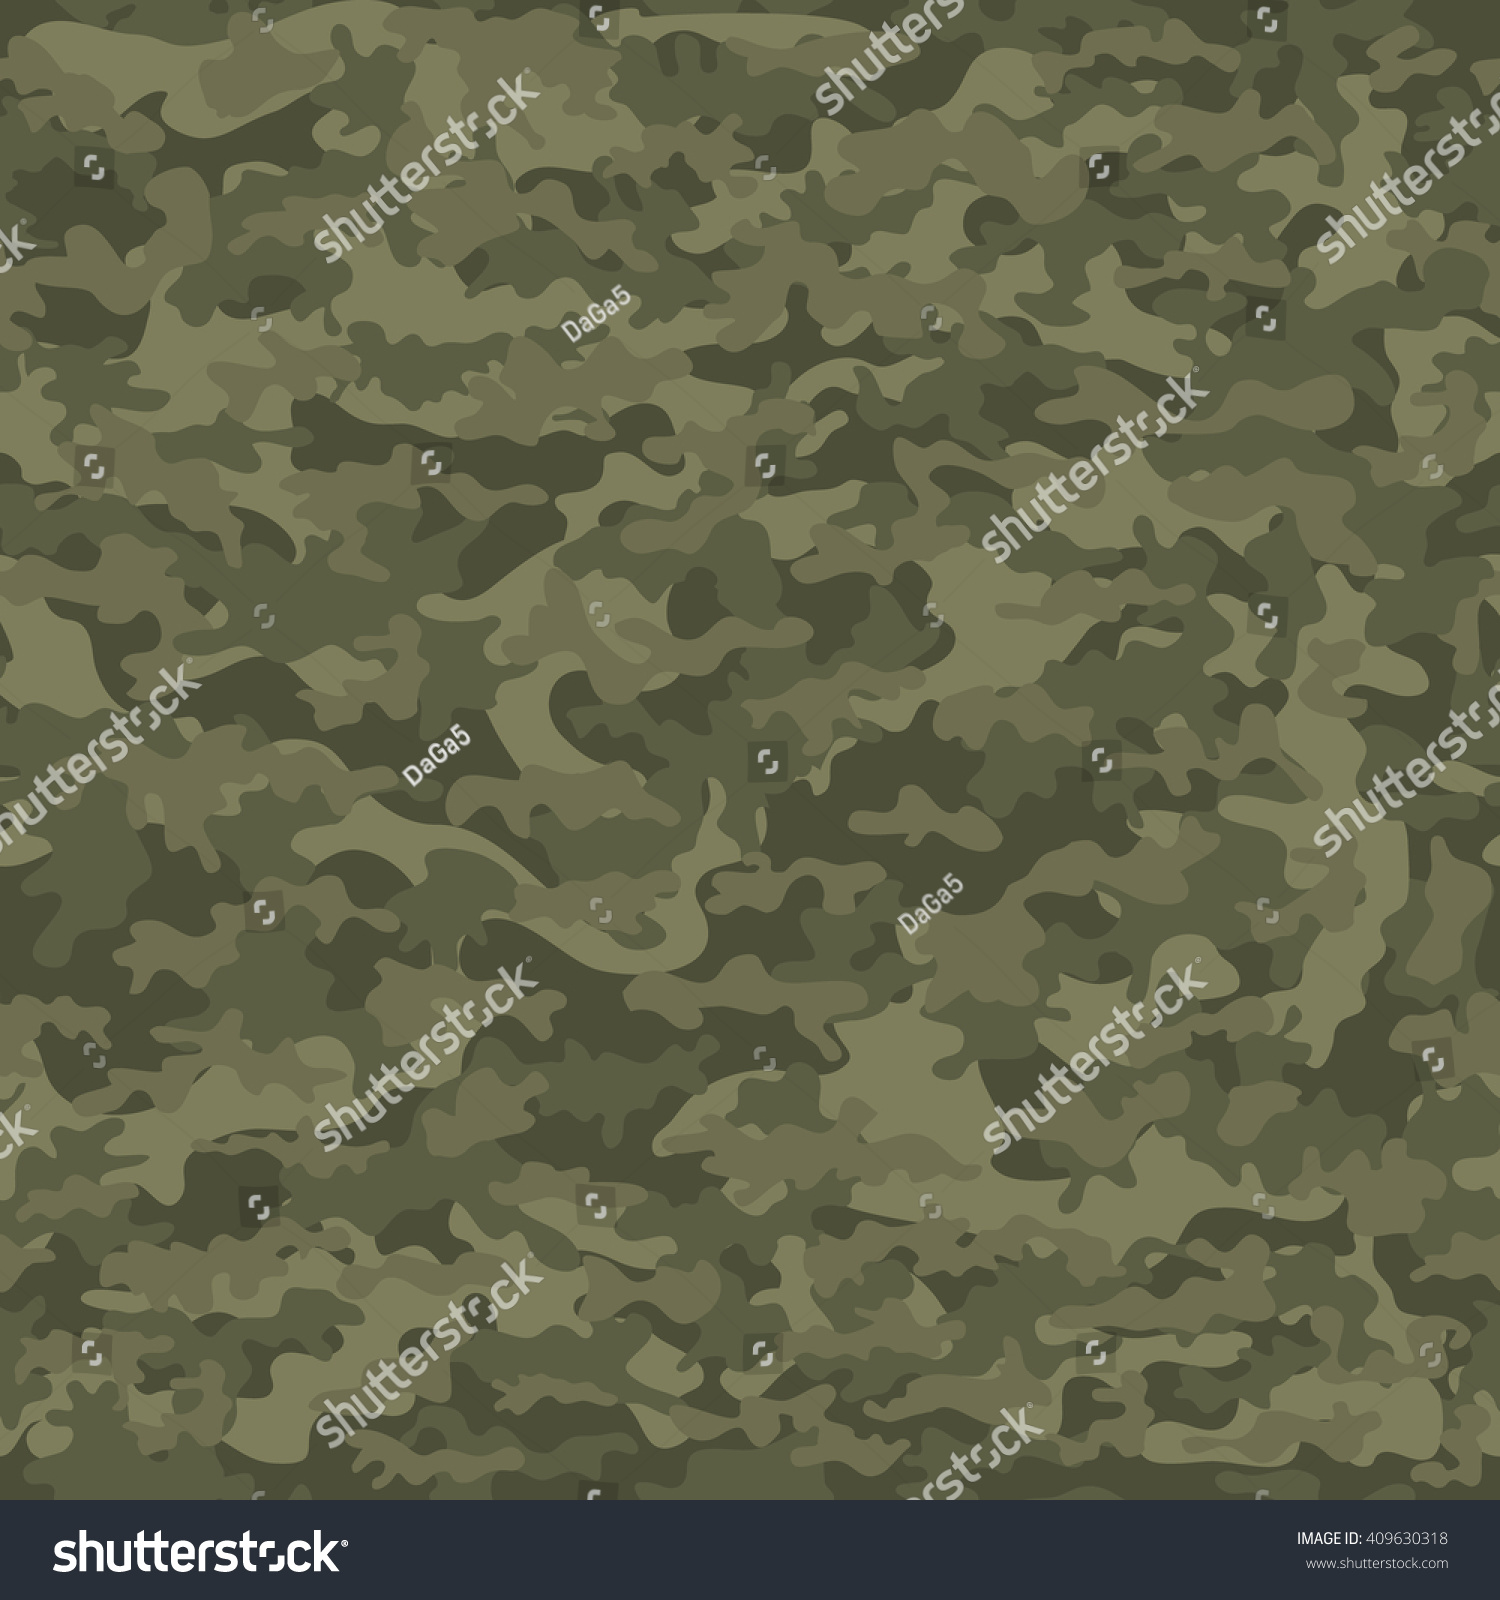 Army green Images, Stock Photos & Vectors | Shutterstock